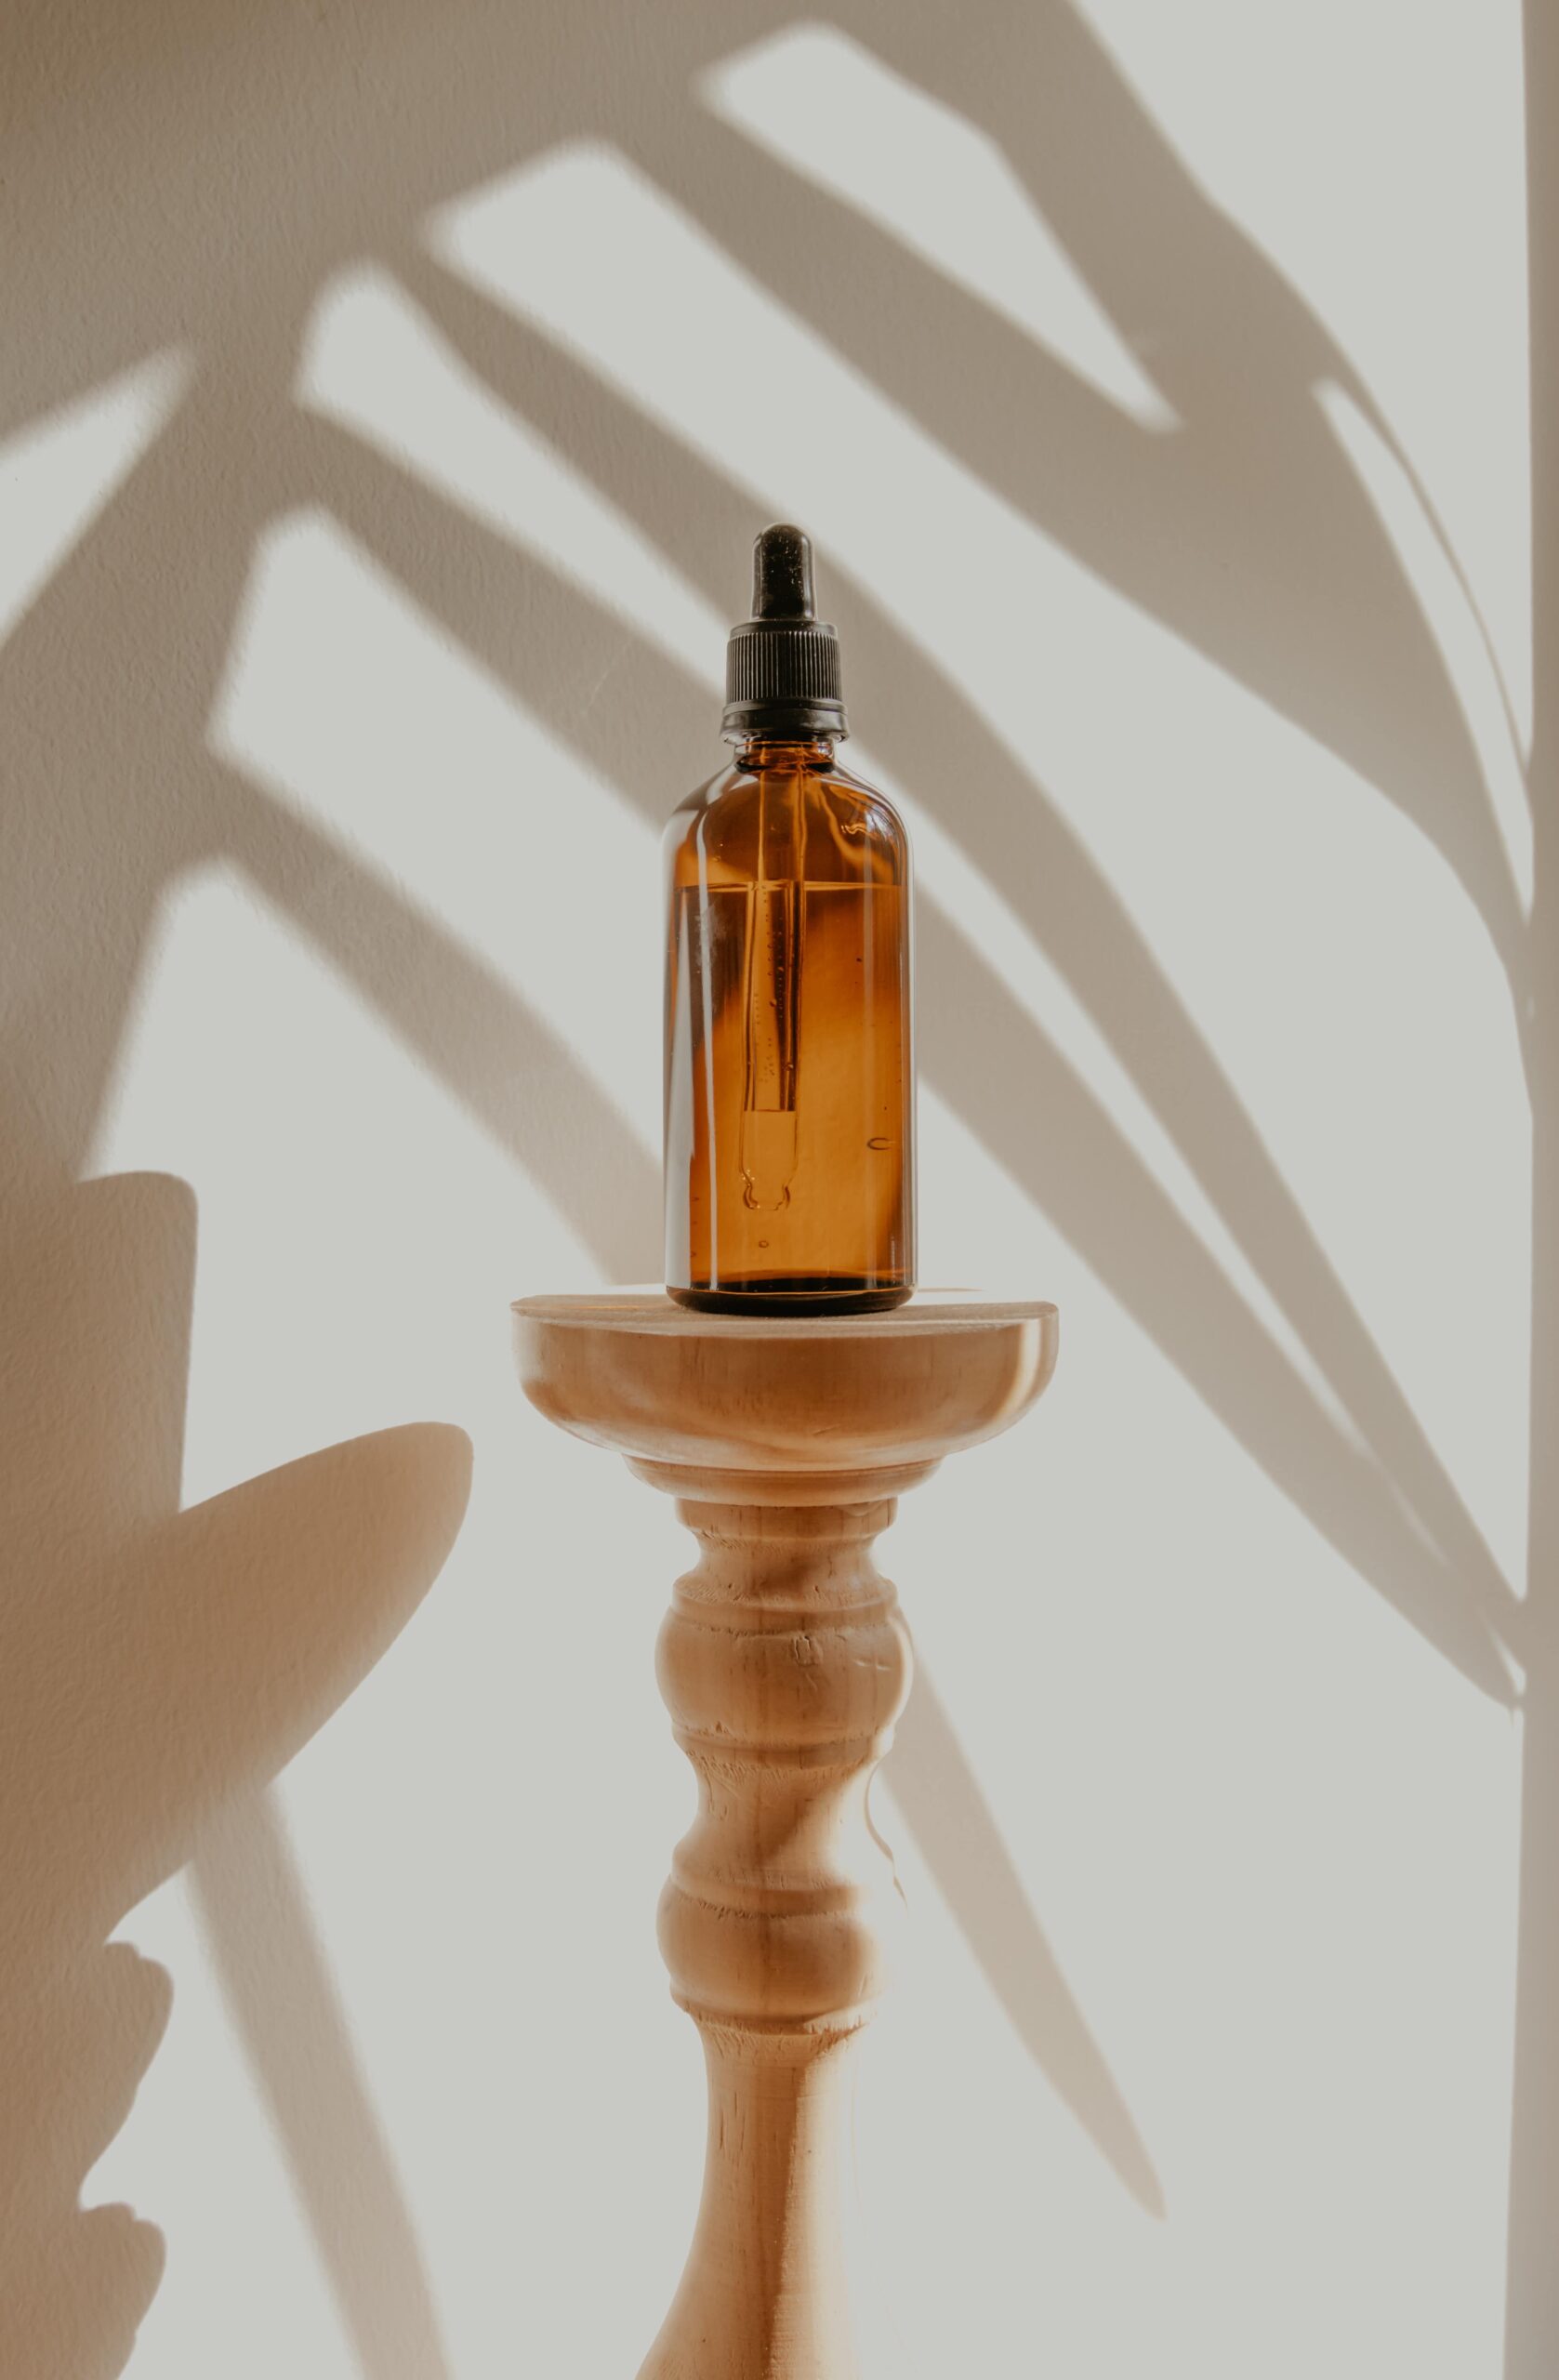 A CBD oil bottle is displayed on a table with a plant silhouette against the wall